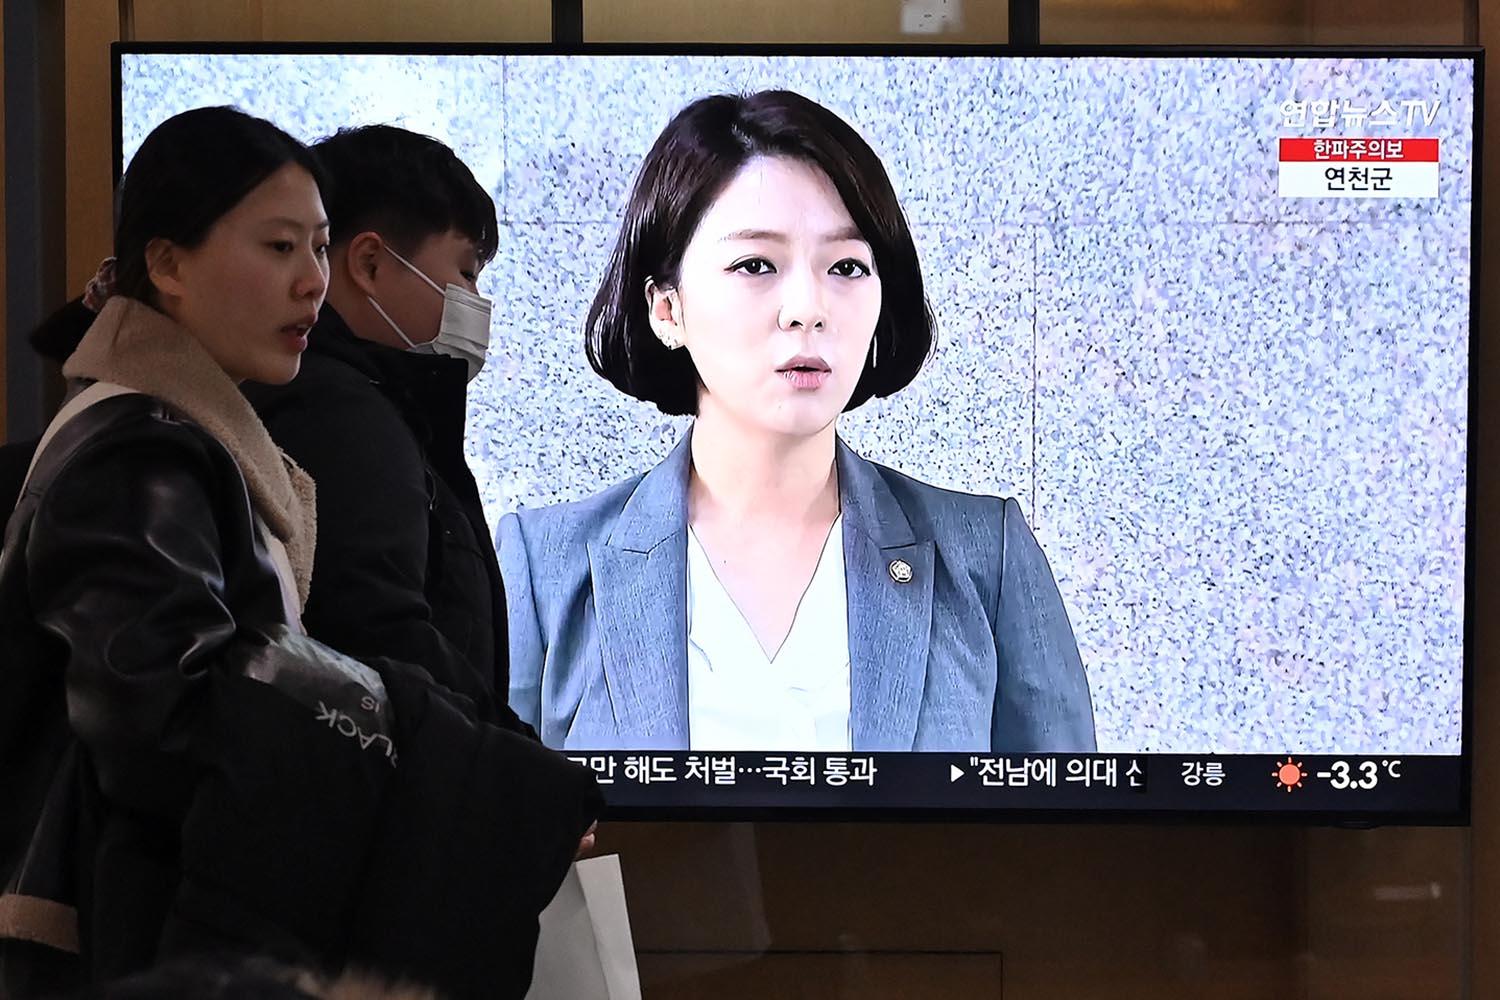 south-korea-shock-after-female-politician-is-attacked-with-rock-SPACEBAR-Hero.jpg